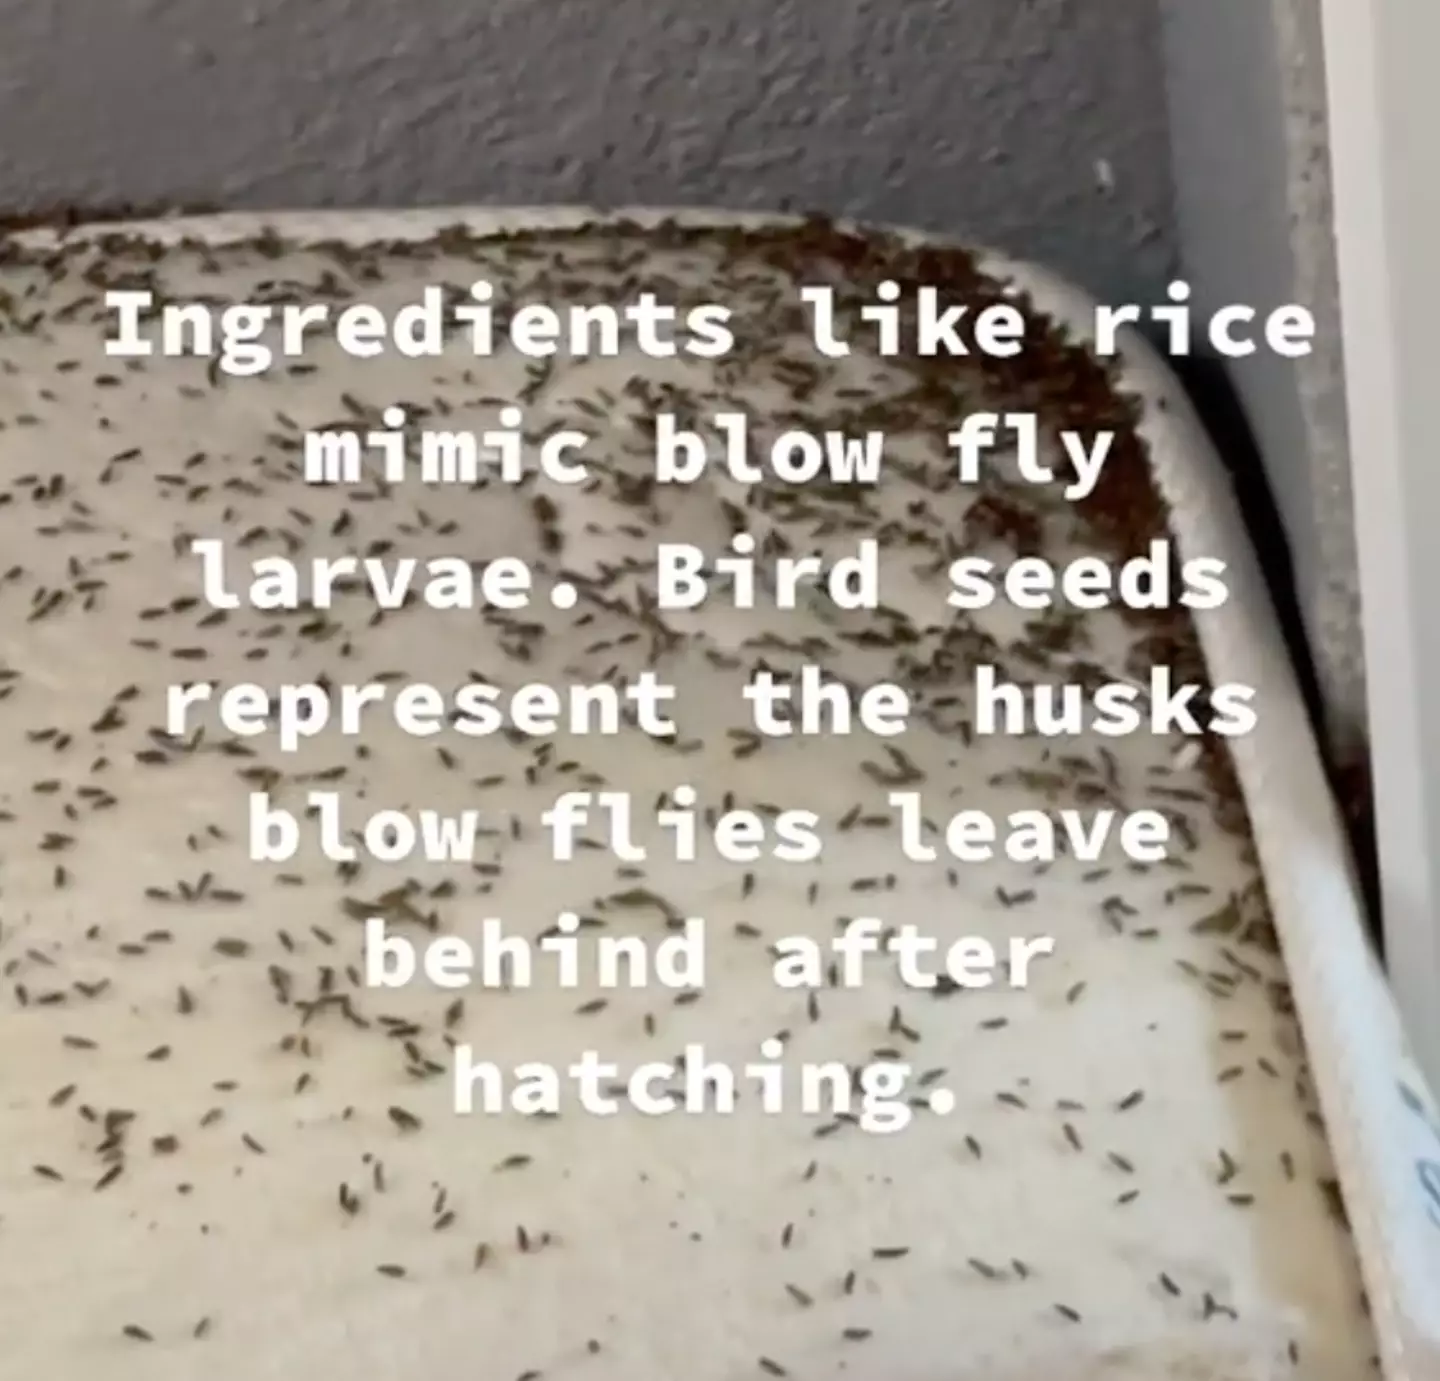 Rice is used to mimic blow fly larvae.